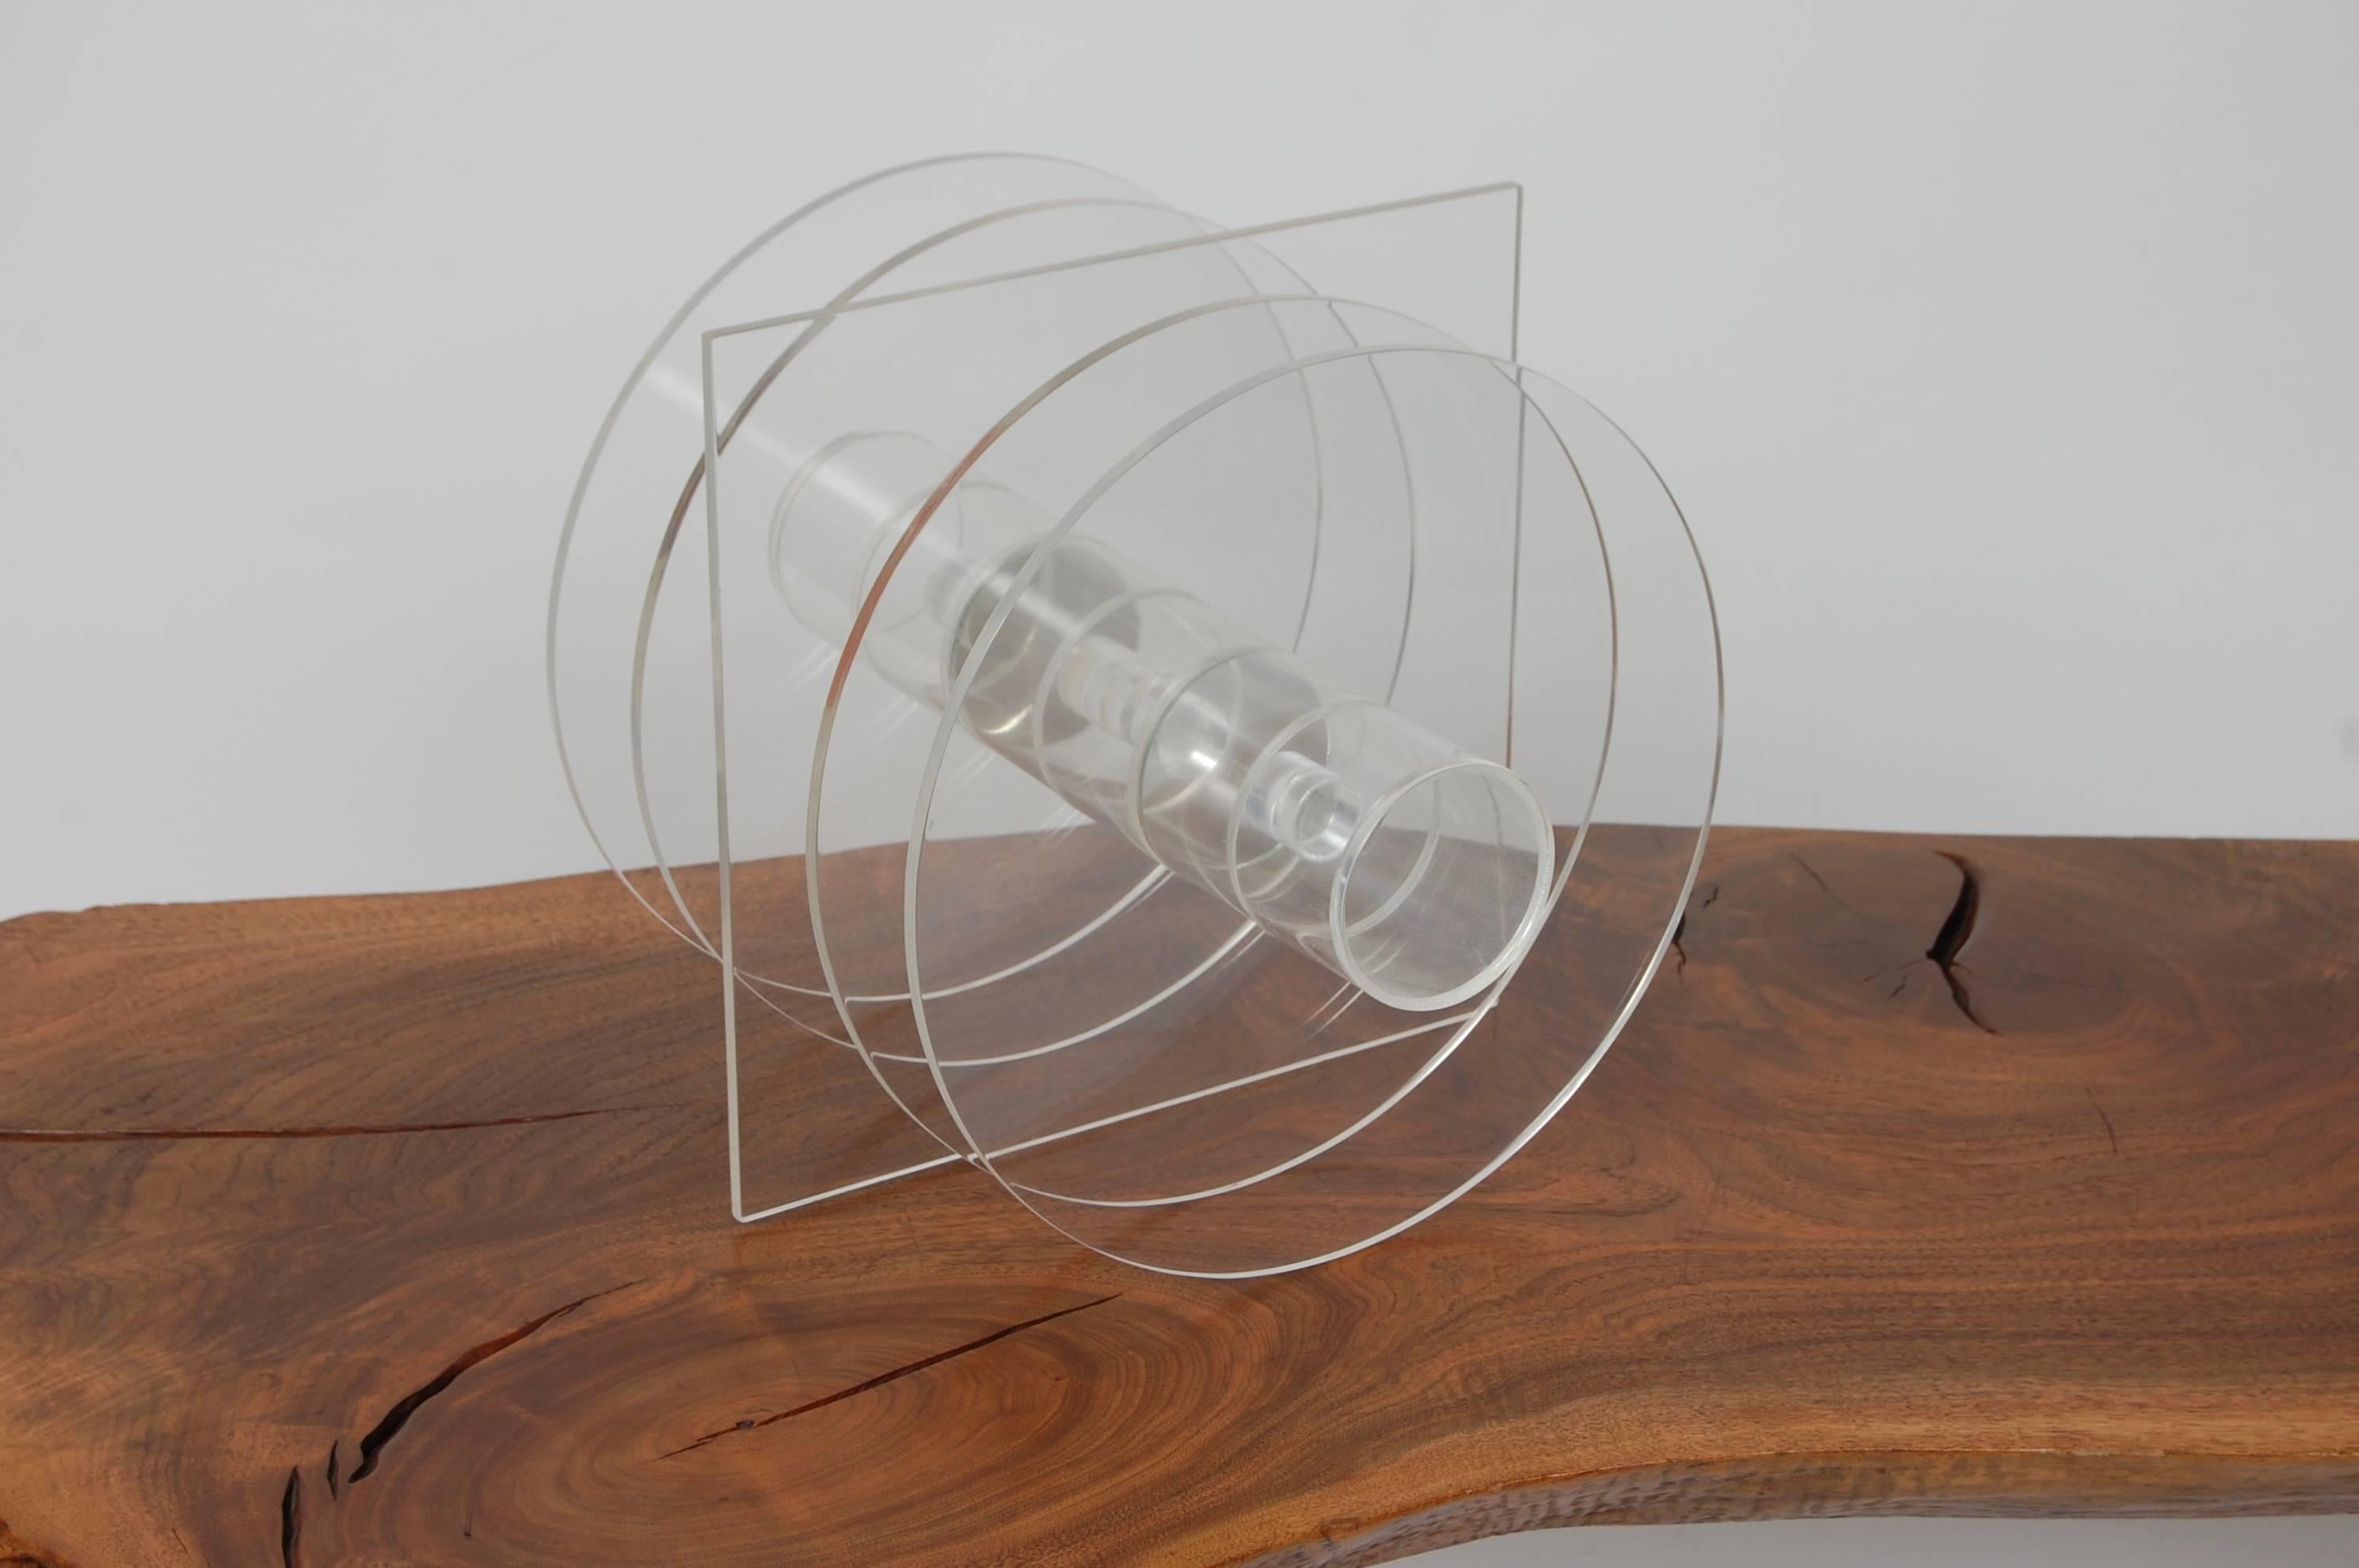 Acrylic abstract sculpture consisting of bisected circles and a square created during the 1970s by San Diego artist Bob Matheny (b 1929). Matheny moved to San Diego during the 1950s, was part of the Aillied Craftsman, he taught and helped create the